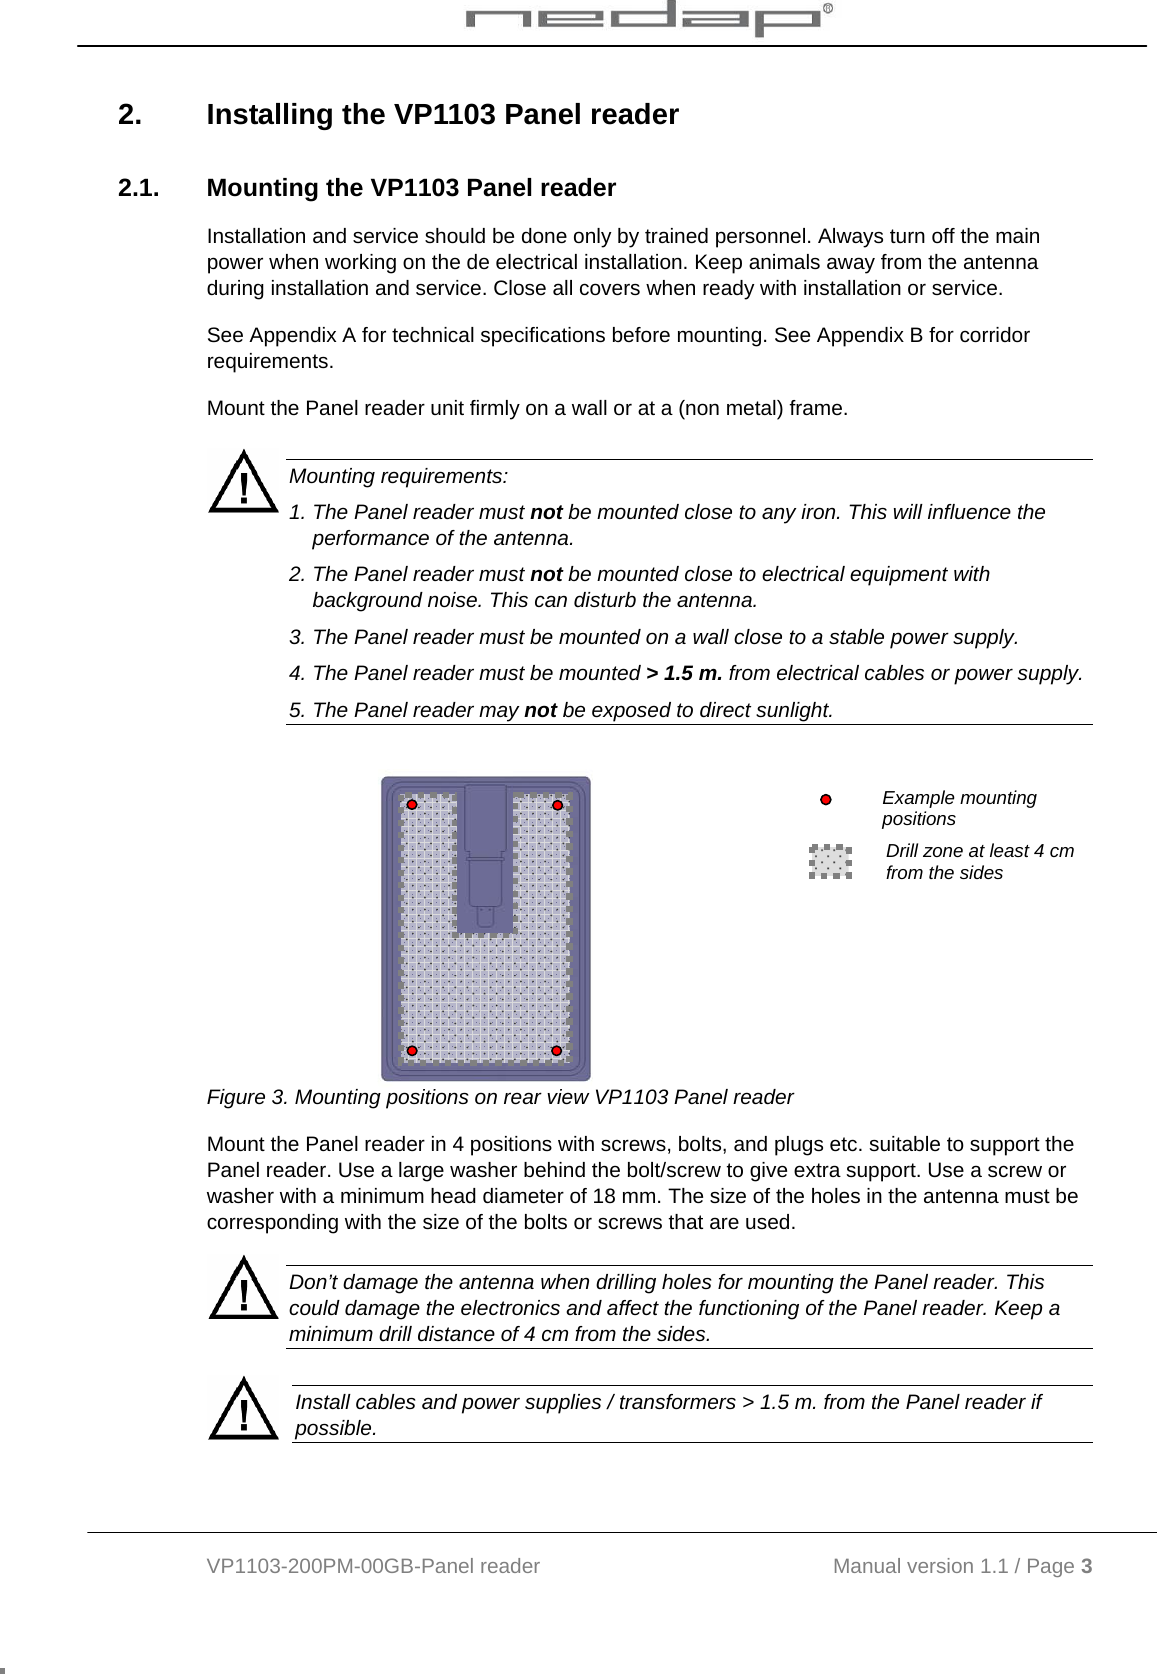  VP1103-200PM-00GB-Panel reader                                           Manual version 1.1 / Page 3  2.  Installing the VP1103 Panel reader 2.1.  Mounting the VP1103 Panel reader Installation and service should be done only by trained personnel. Always turn off the main power when working on the de electrical installation. Keep animals away from the antenna during installation and service. Close all covers when ready with installation or service.  See Appendix A for technical specifications before mounting. See Appendix B for corridor requirements.  Mount the Panel reader unit firmly on a wall or at a (non metal) frame.   Mounting requirements: 1. The Panel reader must not be mounted close to any iron. This will influence the performance of the antenna. 2. The Panel reader must not be mounted close to electrical equipment with background noise. This can disturb the antenna. 3. The Panel reader must be mounted on a wall close to a stable power supply. 4. The Panel reader must be mounted &gt; 1.5 m. from electrical cables or power supply.  5. The Panel reader may not be exposed to direct sunlight.          Example mounting positions Drill zone at least 4 cm from the sides  Figure 3. Mounting positions on rear view VP1103 Panel reader Mount the Panel reader in 4 positions with screws, bolts, and plugs etc. suitable to support the Panel reader. Use a large washer behind the bolt/screw to give extra support. Use a screw or washer with a minimum head diameter of 18 mm. The size of the holes in the antenna must be corresponding with the size of the bolts or screws that are used.  Don’t damage the antenna when drilling holes for mounting the Panel reader. This could damage the electronics and affect the functioning of the Panel reader. Keep a minimum drill distance of 4 cm from the sides.   Install cables and power supplies / transformers &gt; 1.5 m. from the Panel reader if possible. 